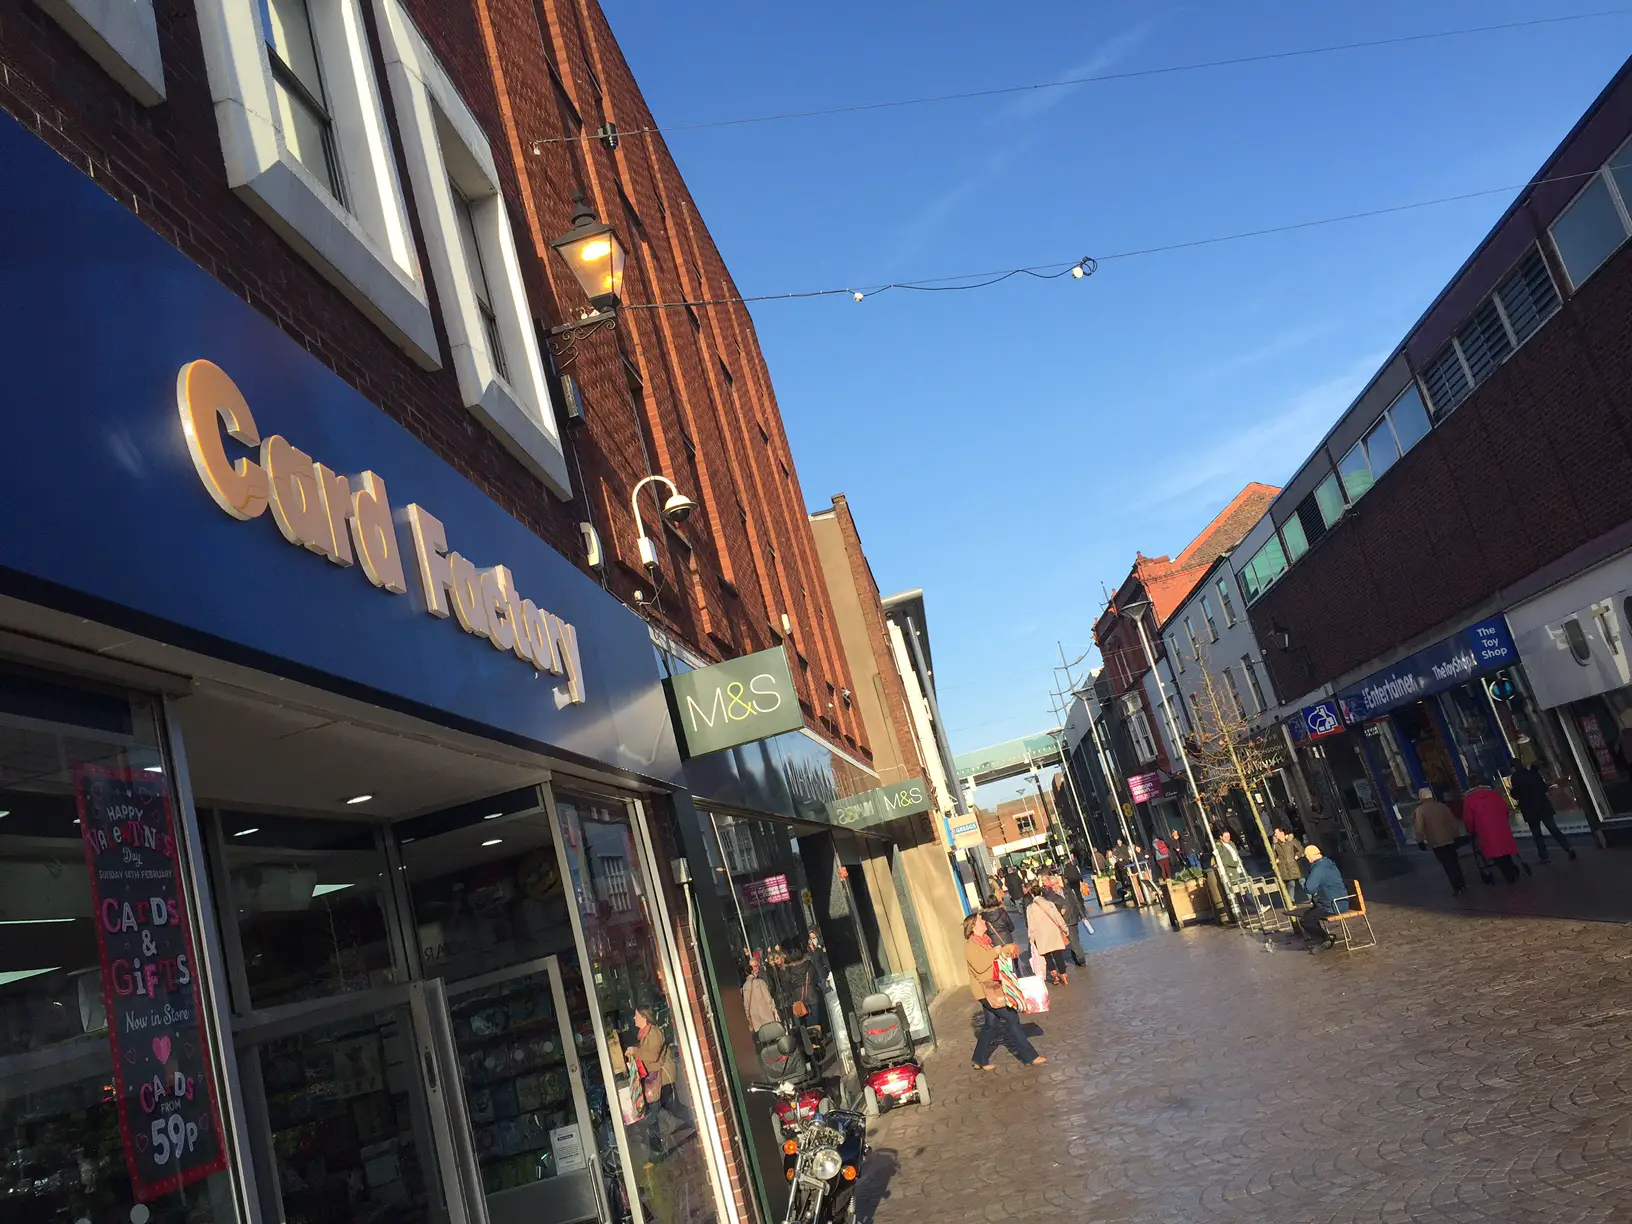 George Street, the main shopping area in Altrincham